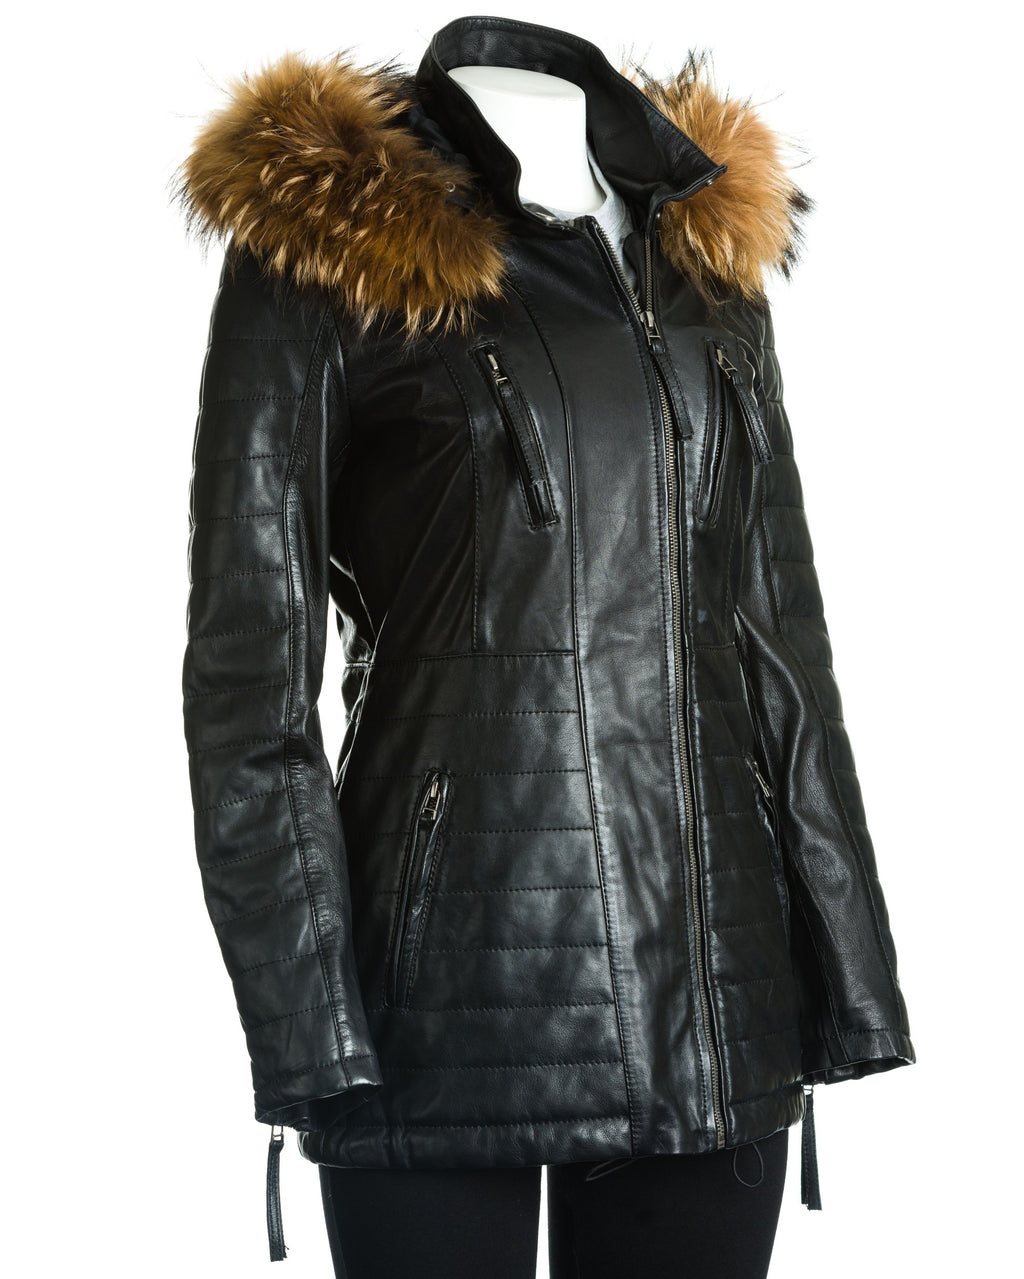 Women's Leather Parka Jacket with Stitch Detail: Pippa